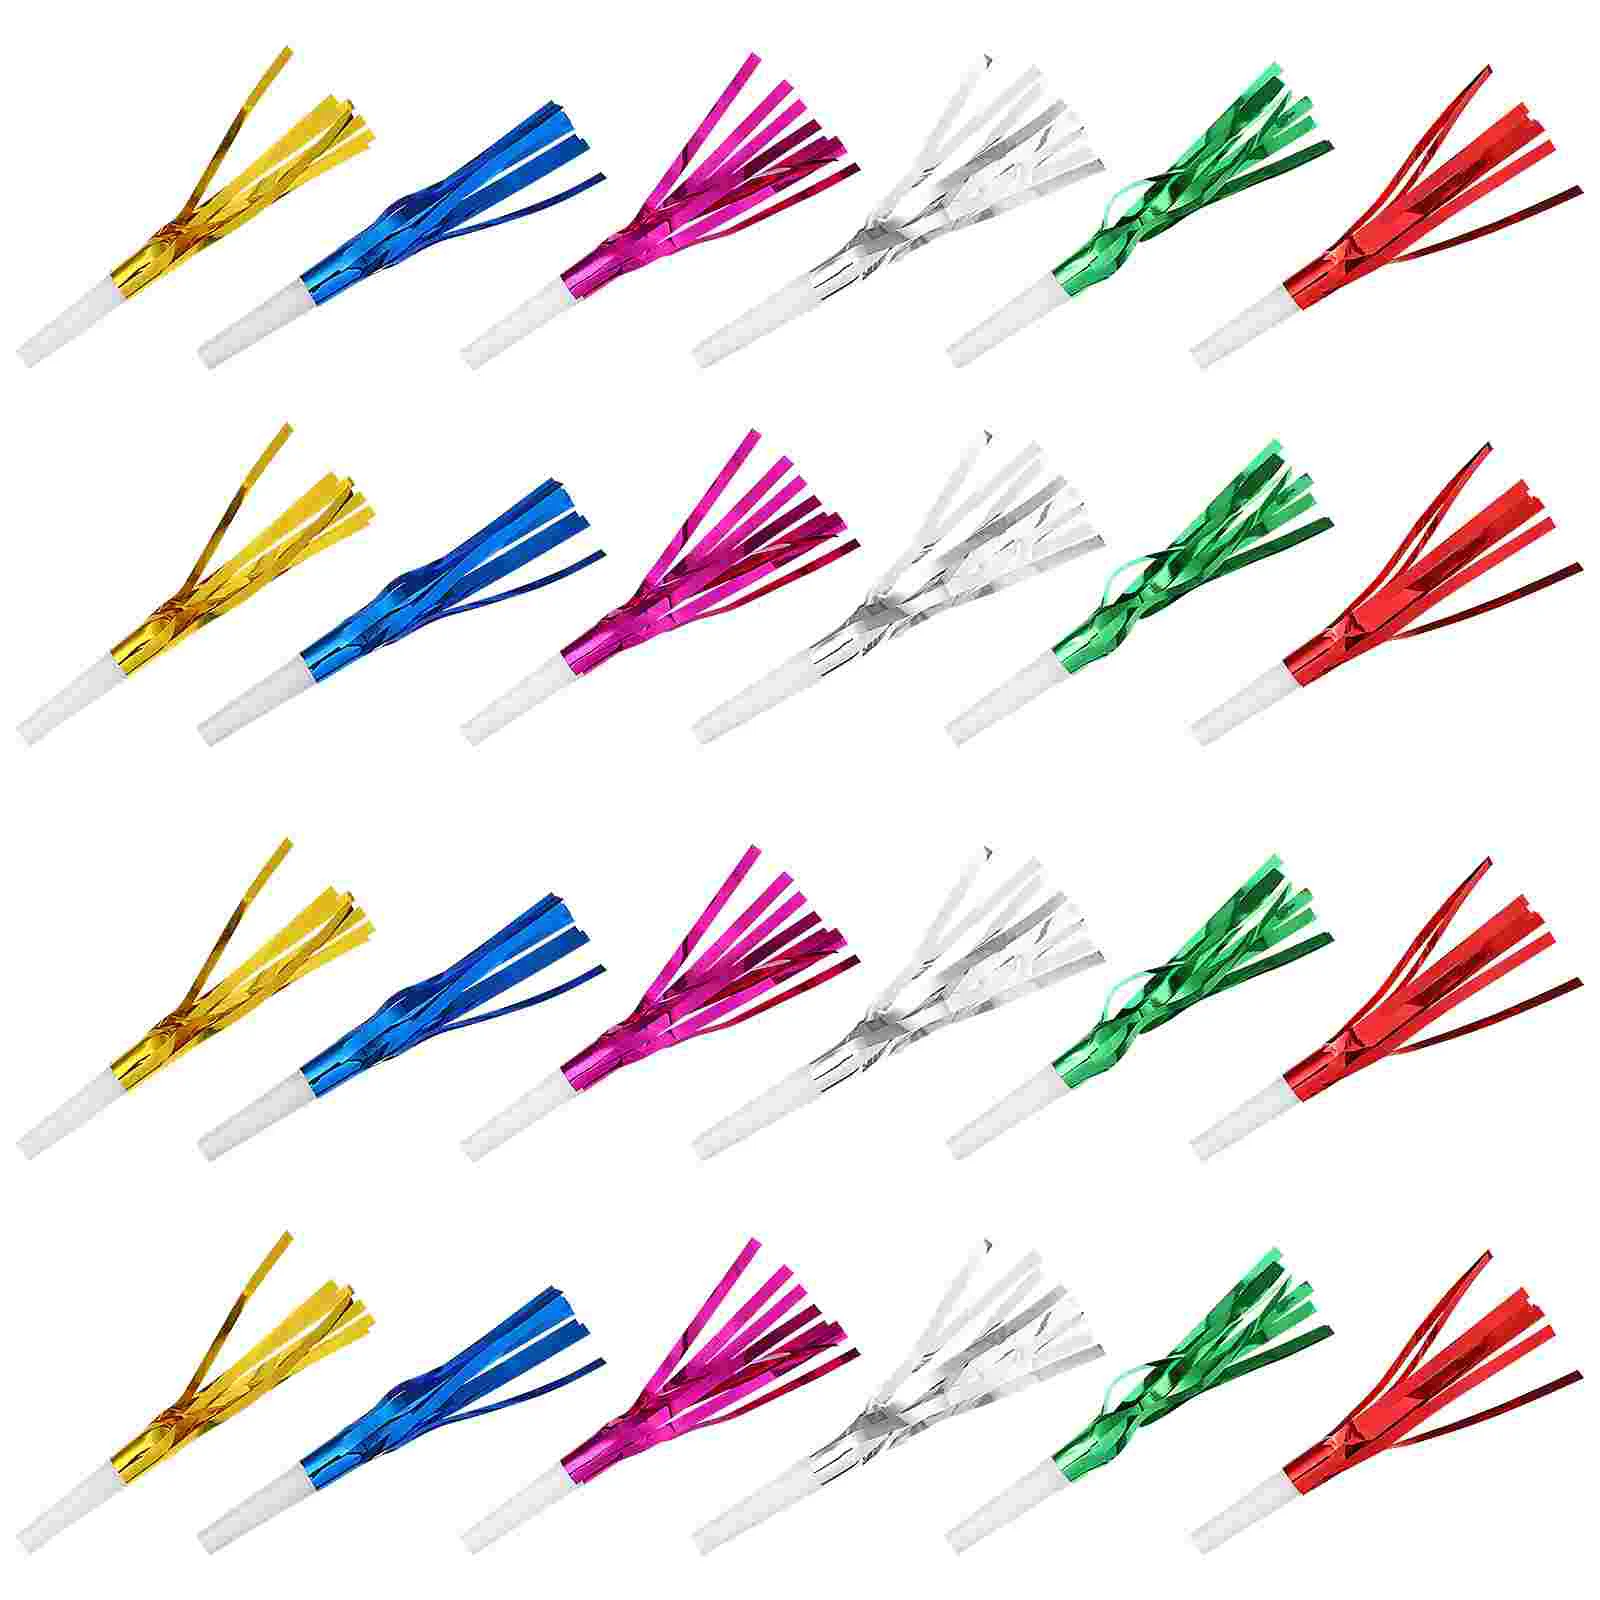 

Party Blowouts Blowers Favors Whistles Whistle Noise Noisemakers Supplies Musical Makers Fringed Birthday Blowout Horns Blower